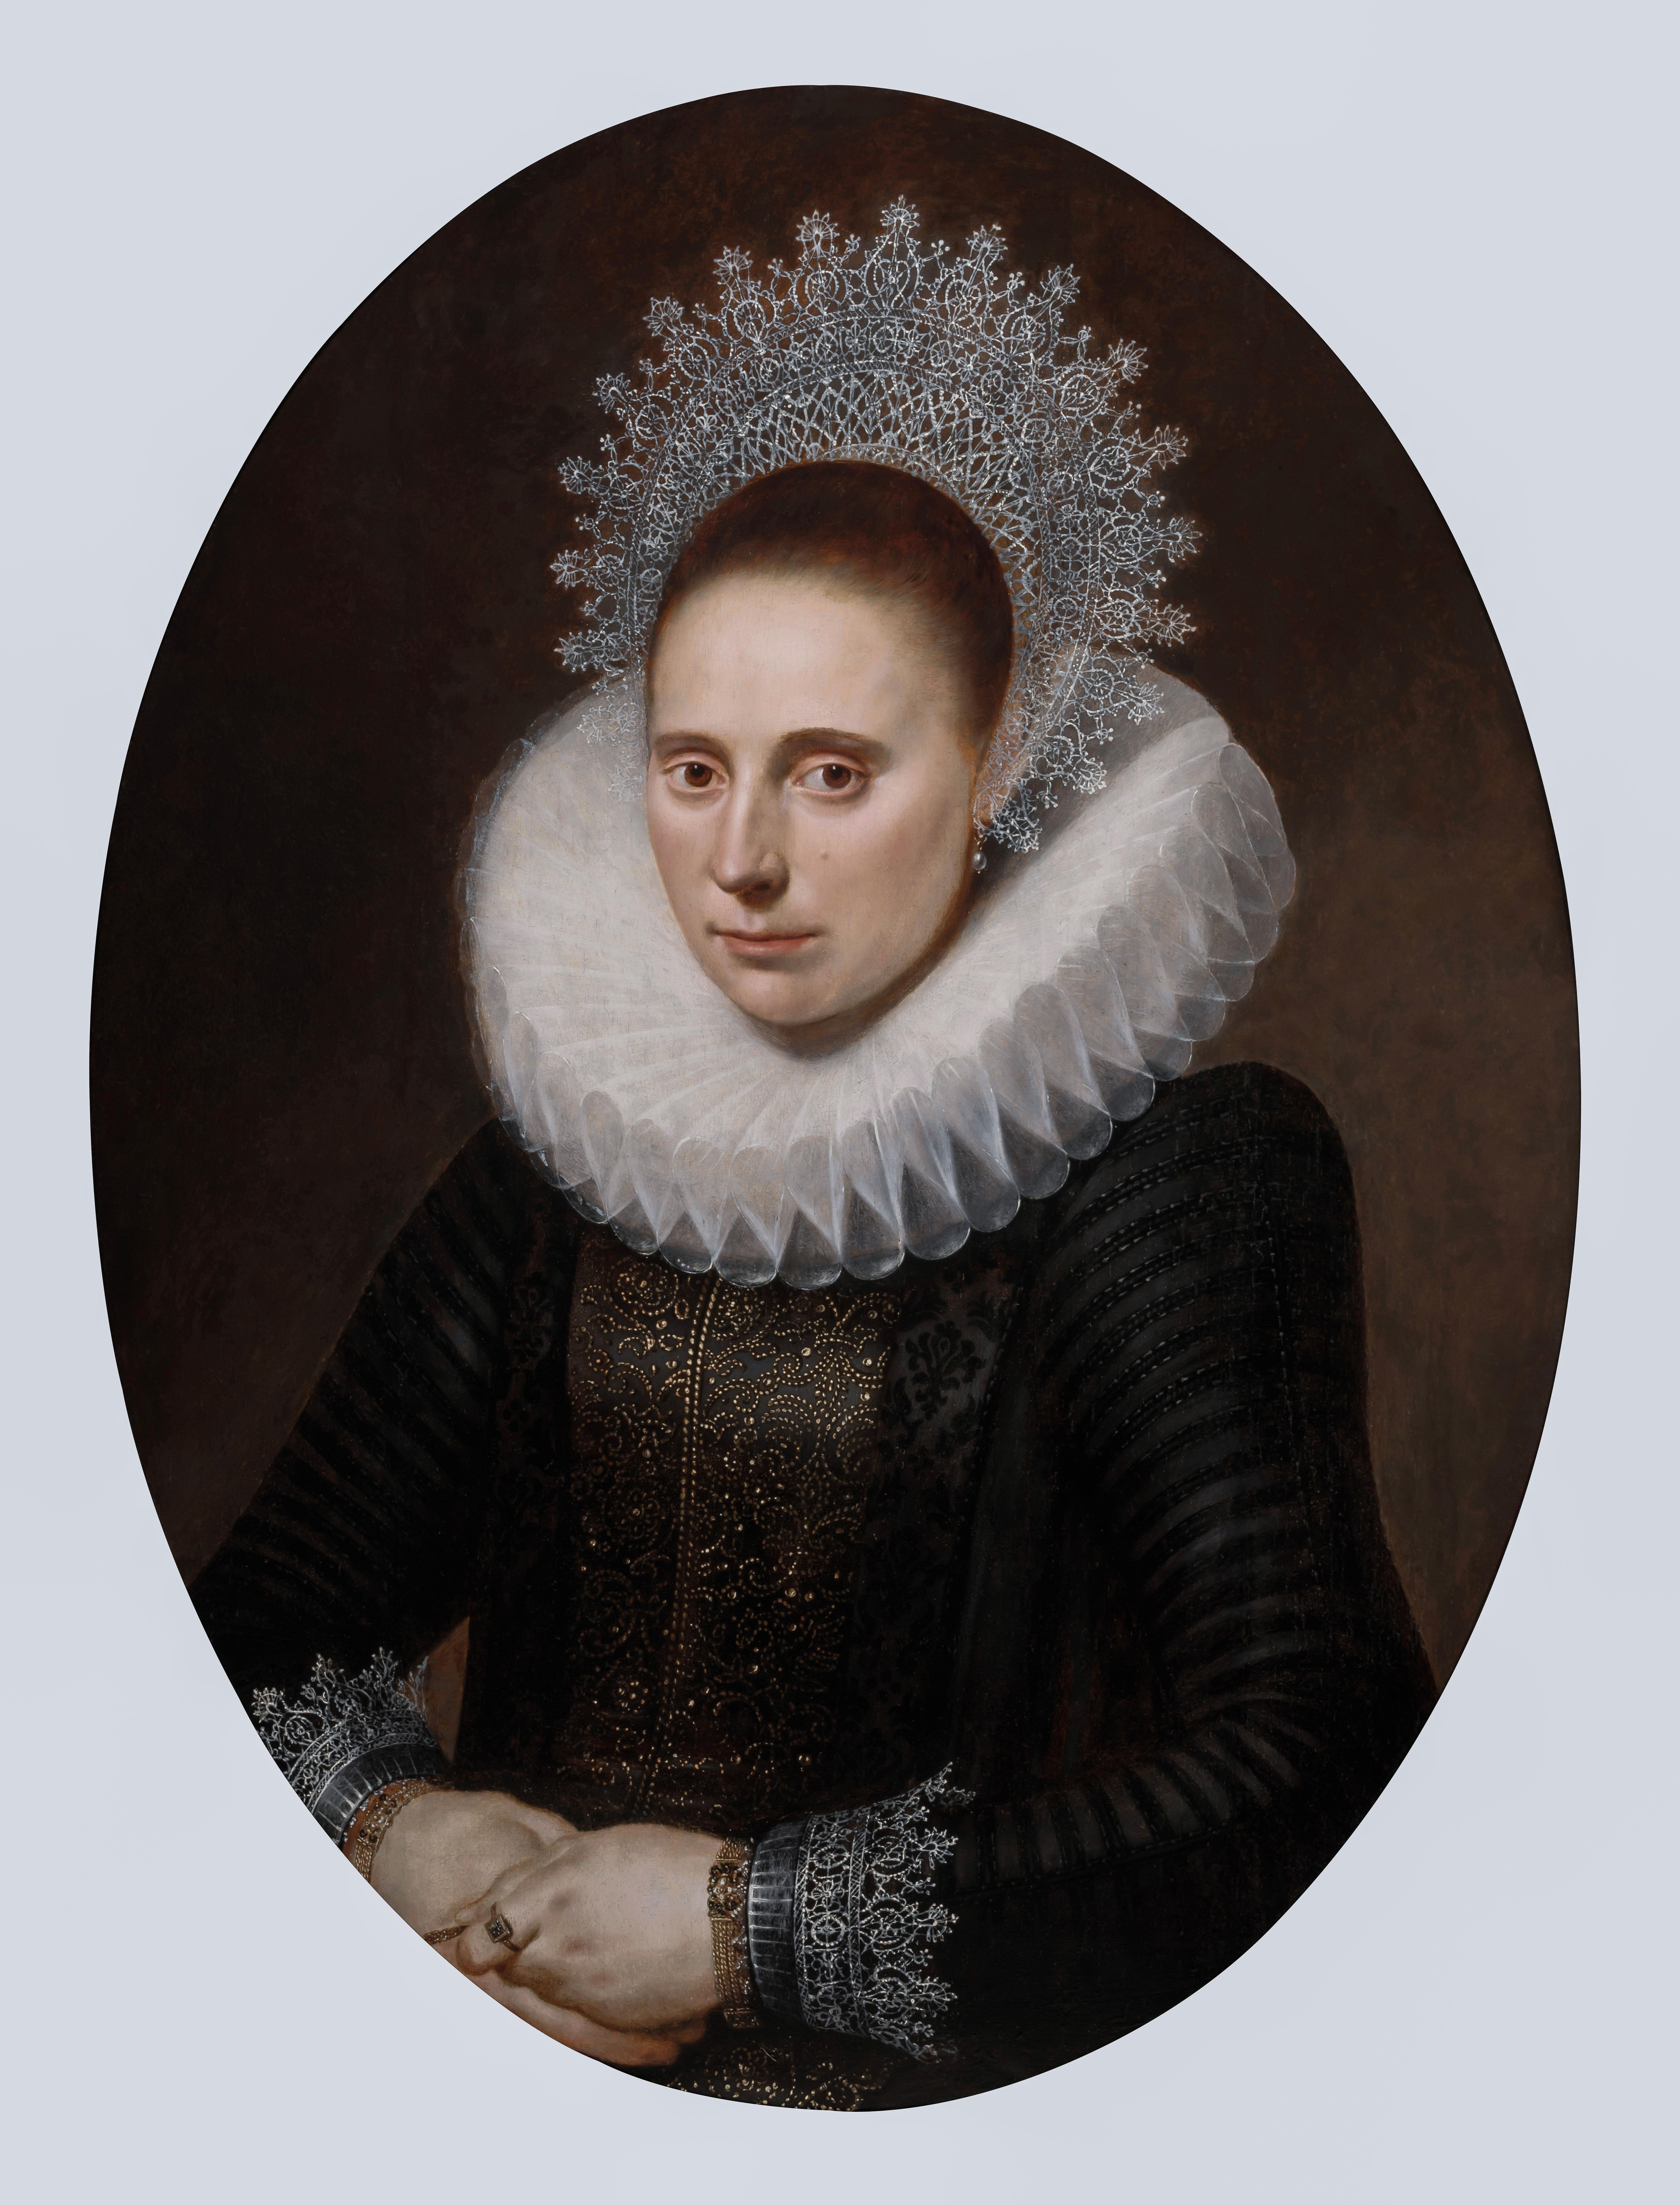 This magnificent oil on panel portrait, presented by Titan Fine Art, is a splendid example of the sumptuous female portraits that were painted for members of the upper echelons of society during the early part of the 1600’s.  The artist has rendered